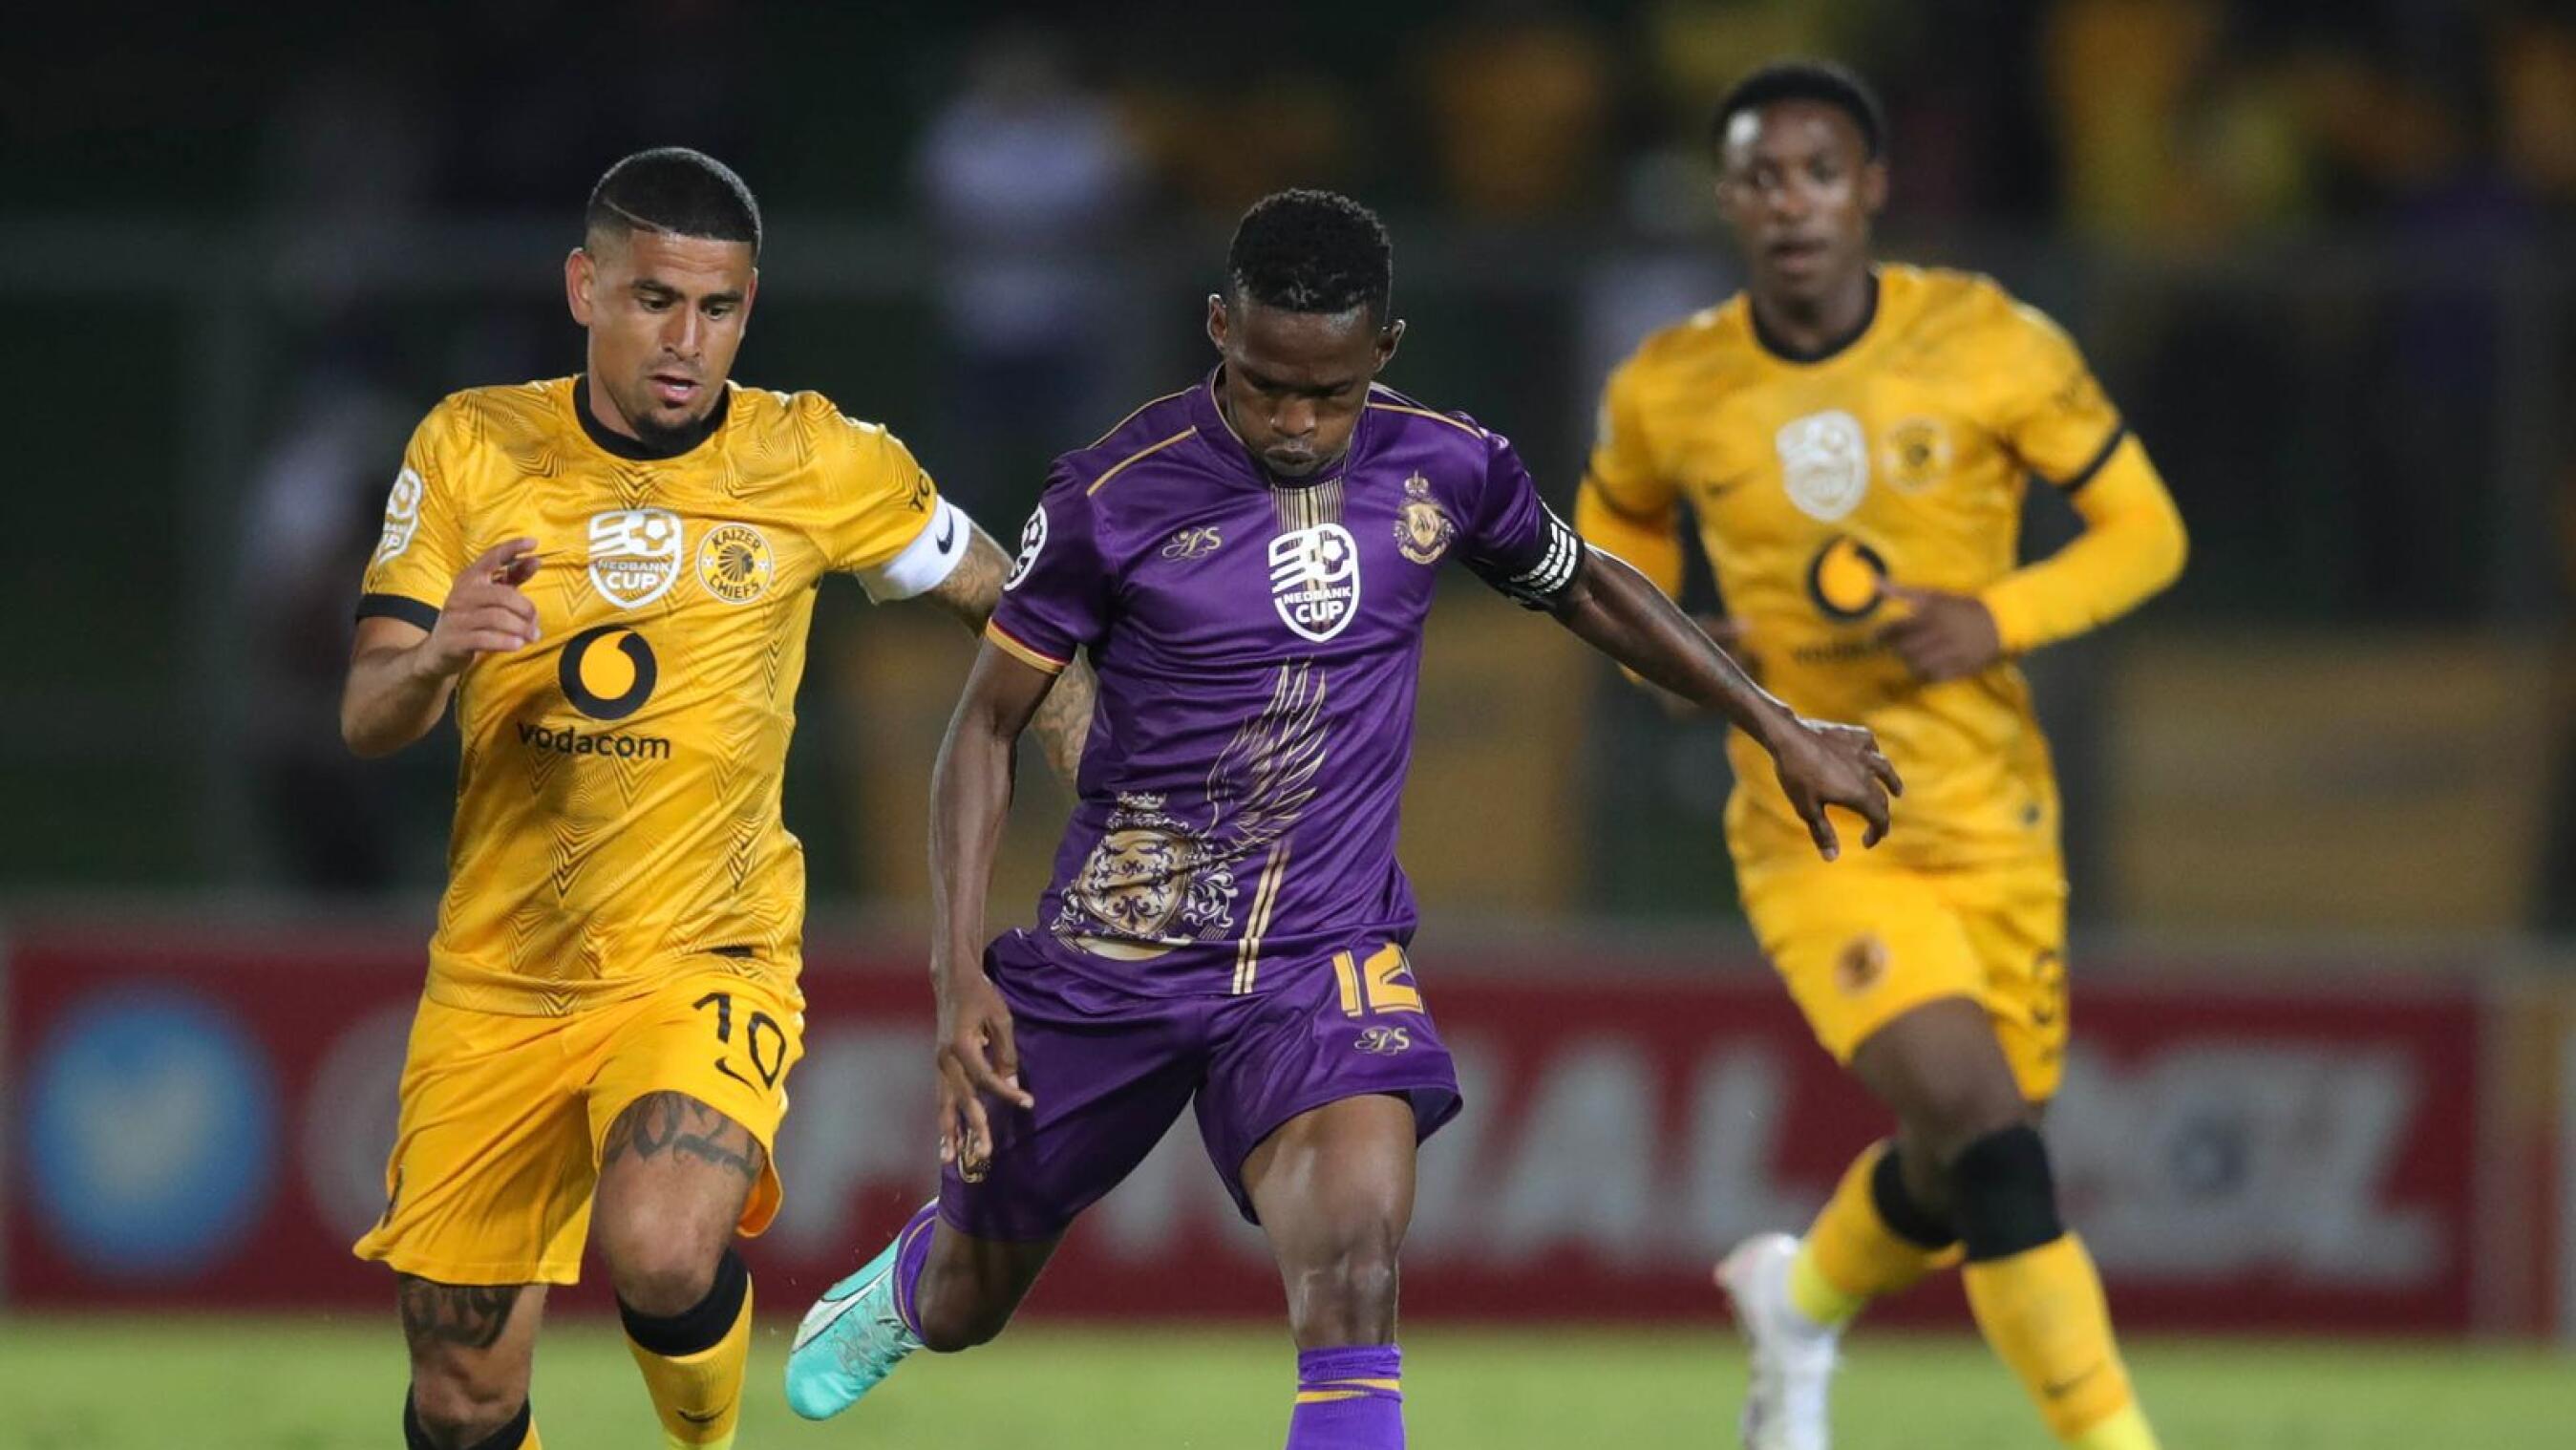 Kabelo Mahlasela of Royal AM is challenged by Keegan Dolly of Kaizer Chiefs during their Nedbank Cup match at Chatsworth Stadium in Durban on Sunday